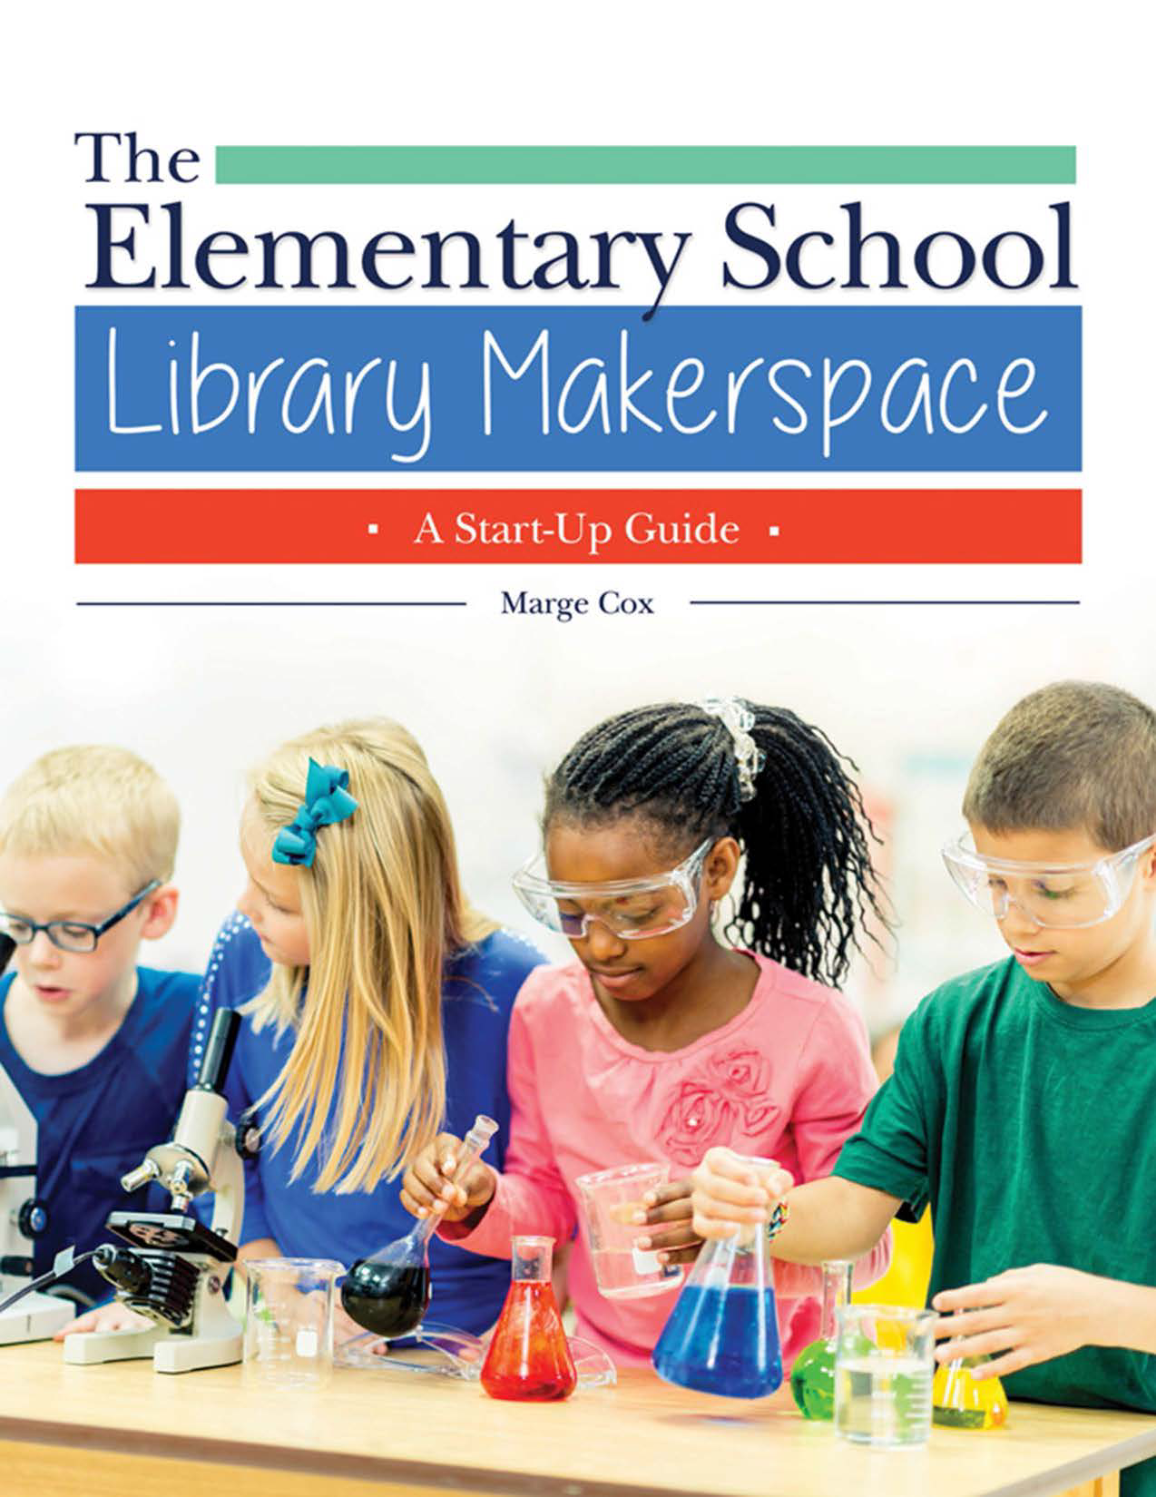 The Elementary School Library Makerspace: A Start-Up Guide page Cover1